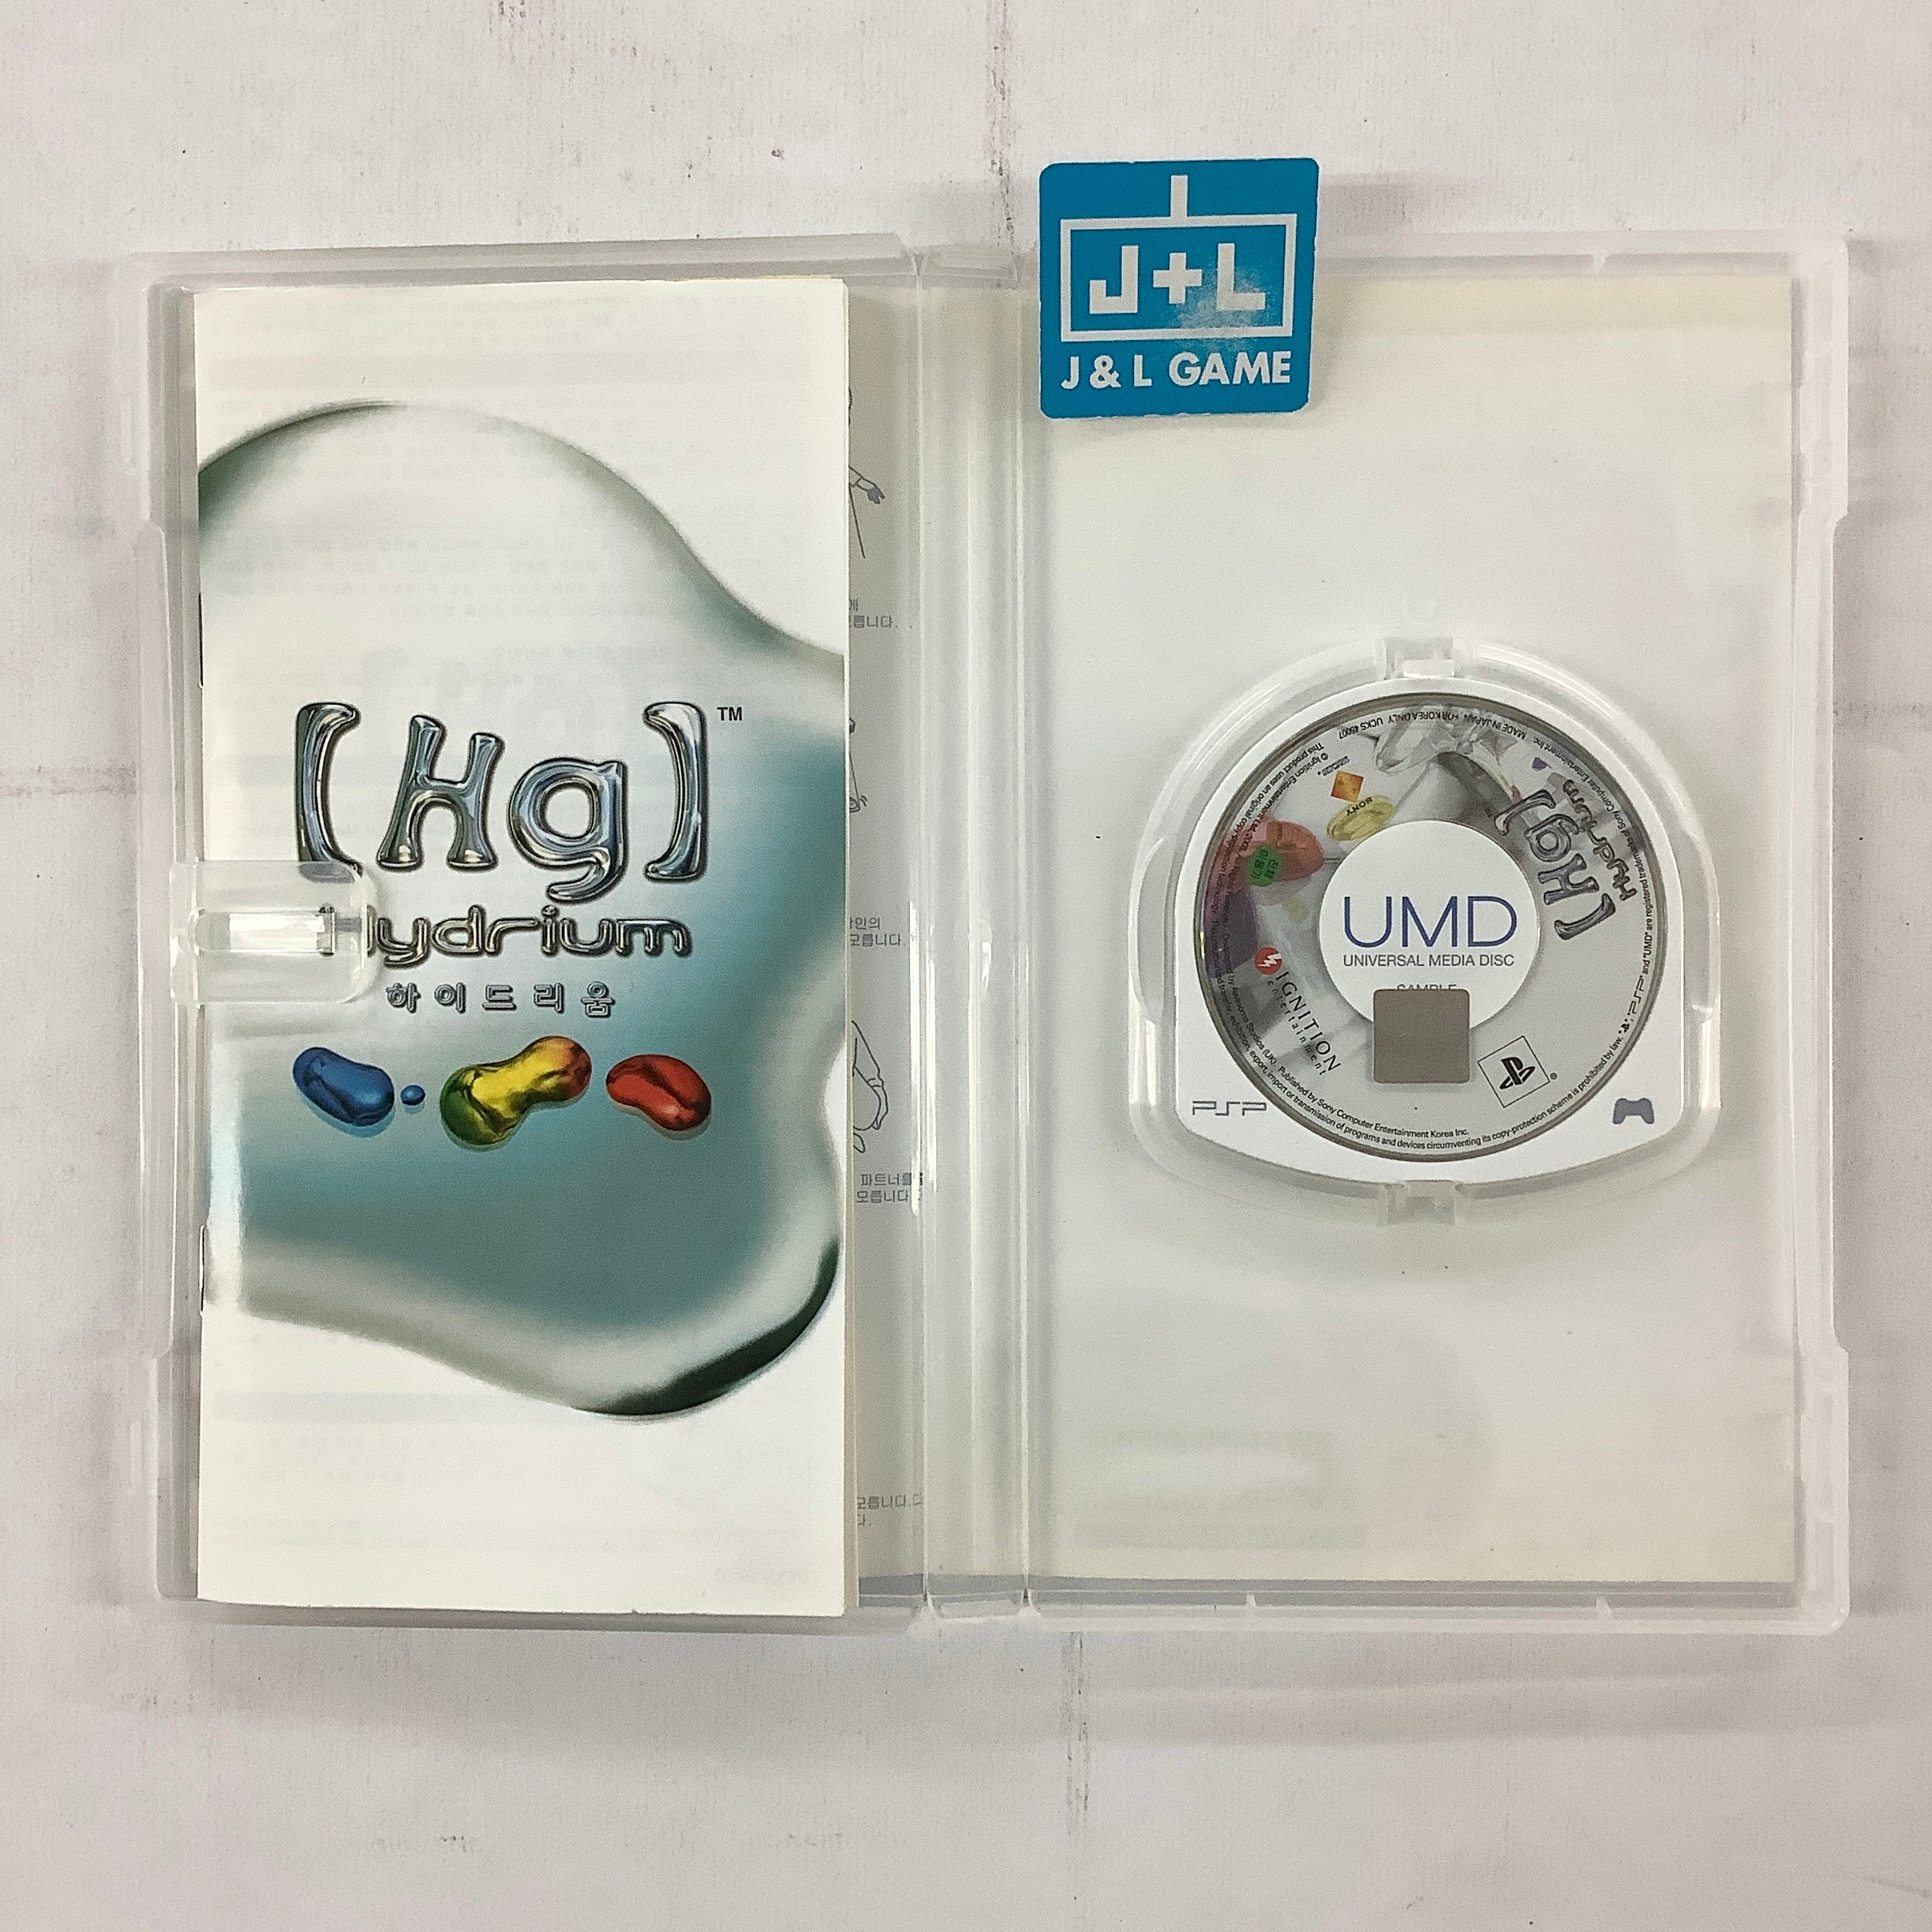 [Hg] Hydrium - Sony PSP [Pre-Owned] (Japanese Import) Video Games Sony   